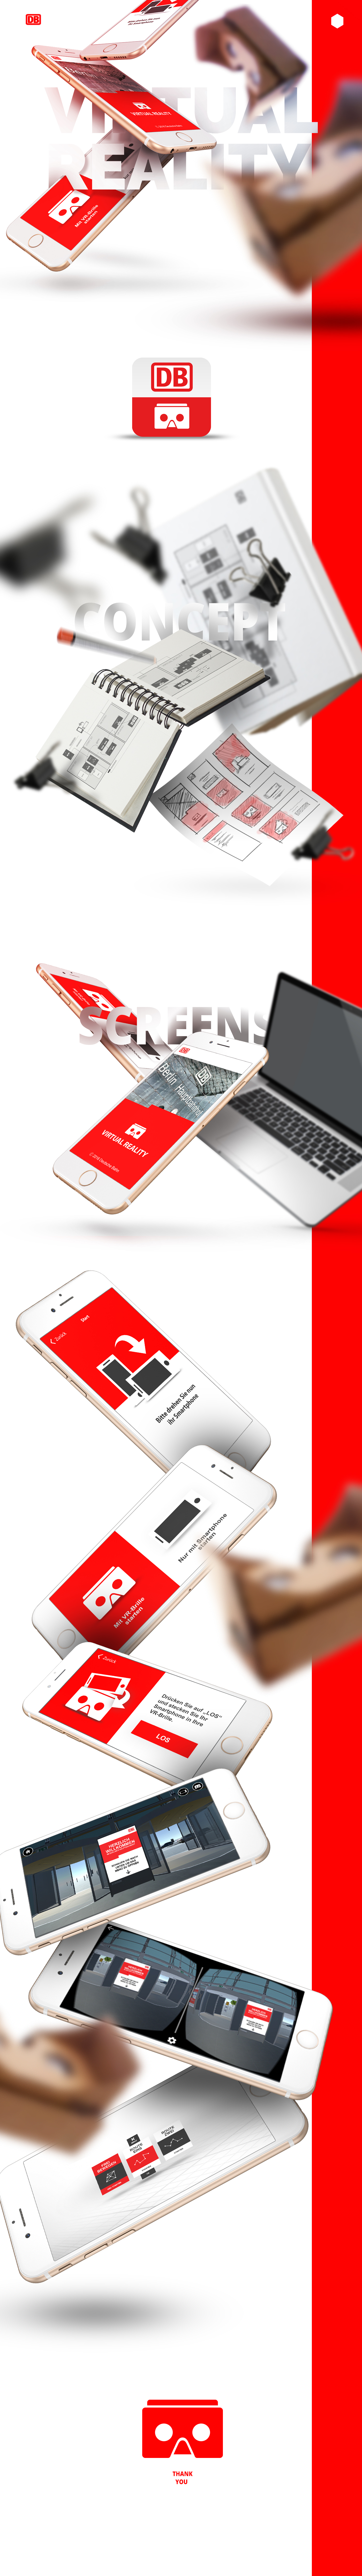 ios android app ux interface design material design card board Virtual reality